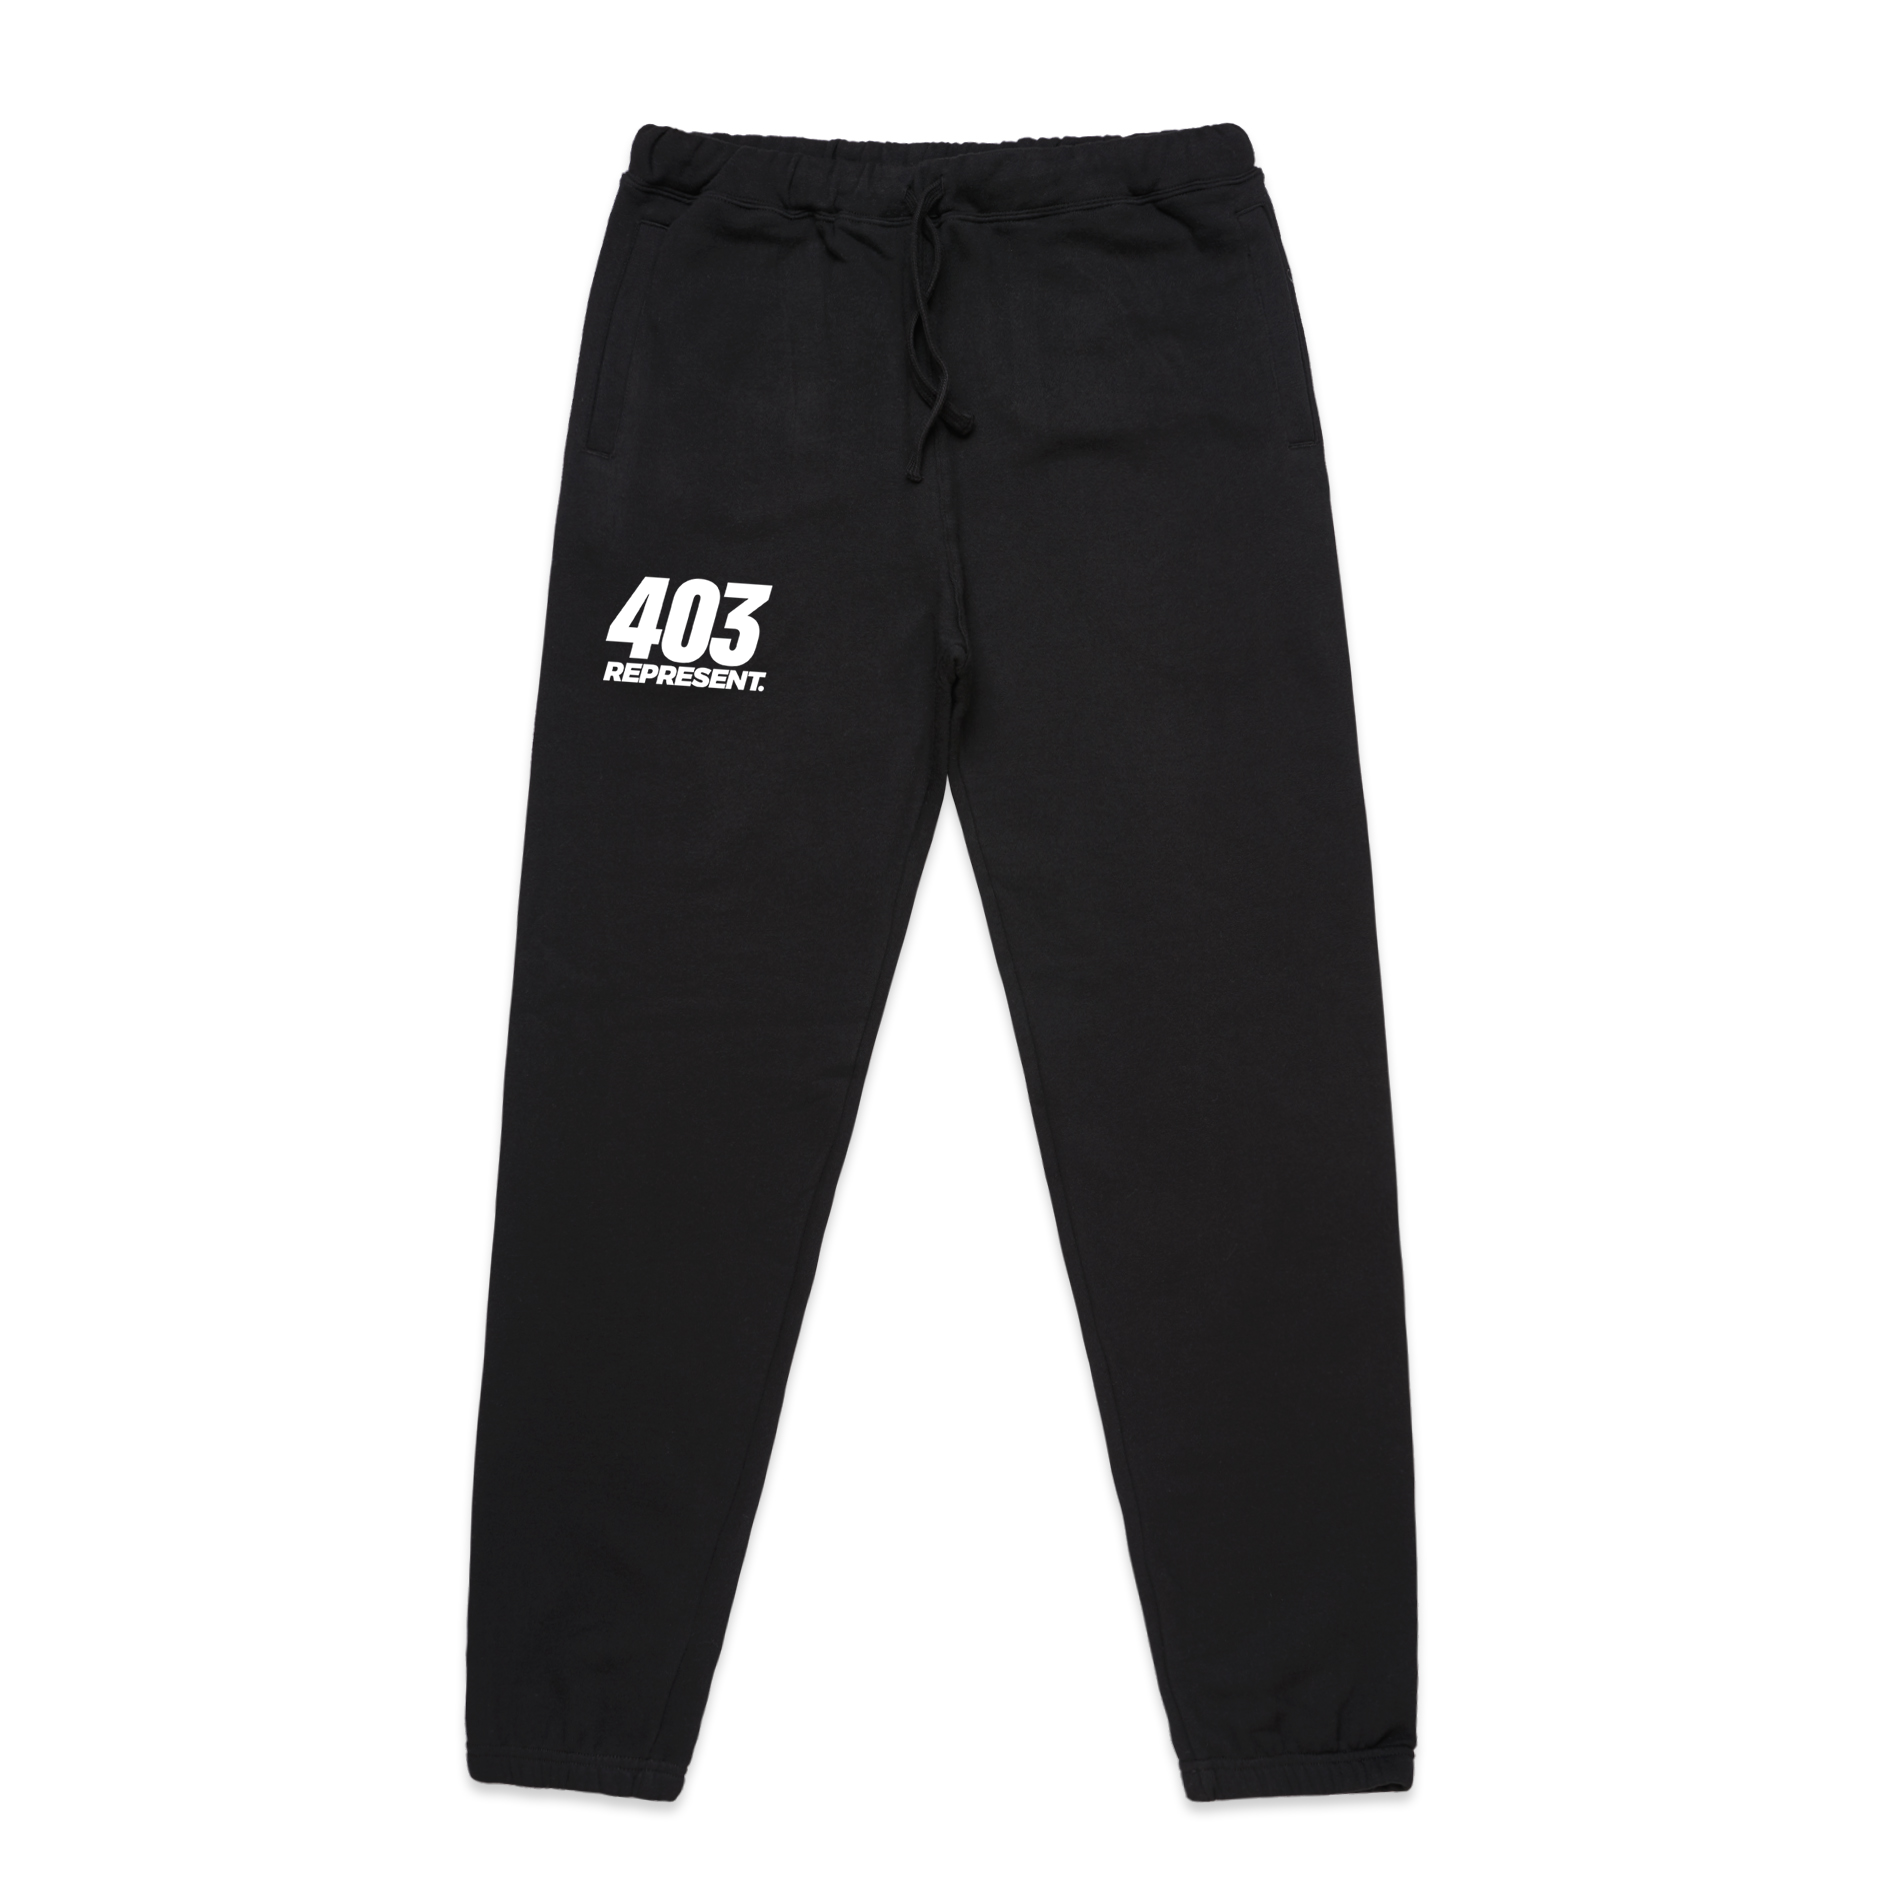 403) THE STEALTH - CLASSIC SWEATPANT